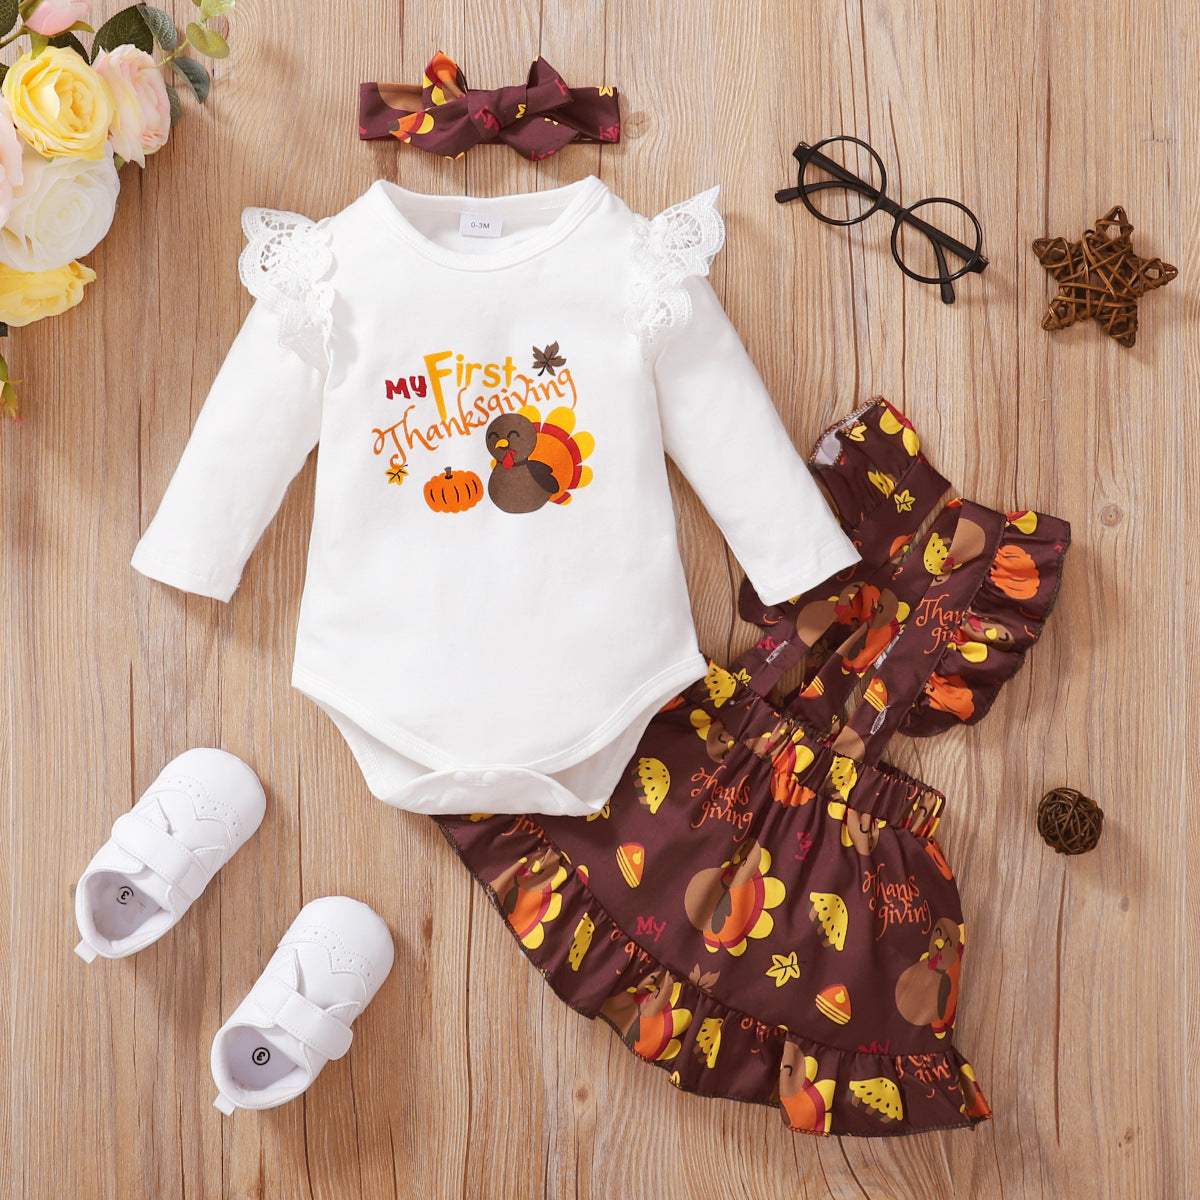 Thanksgiving New Baby Romper Suspender Skirt Outfit